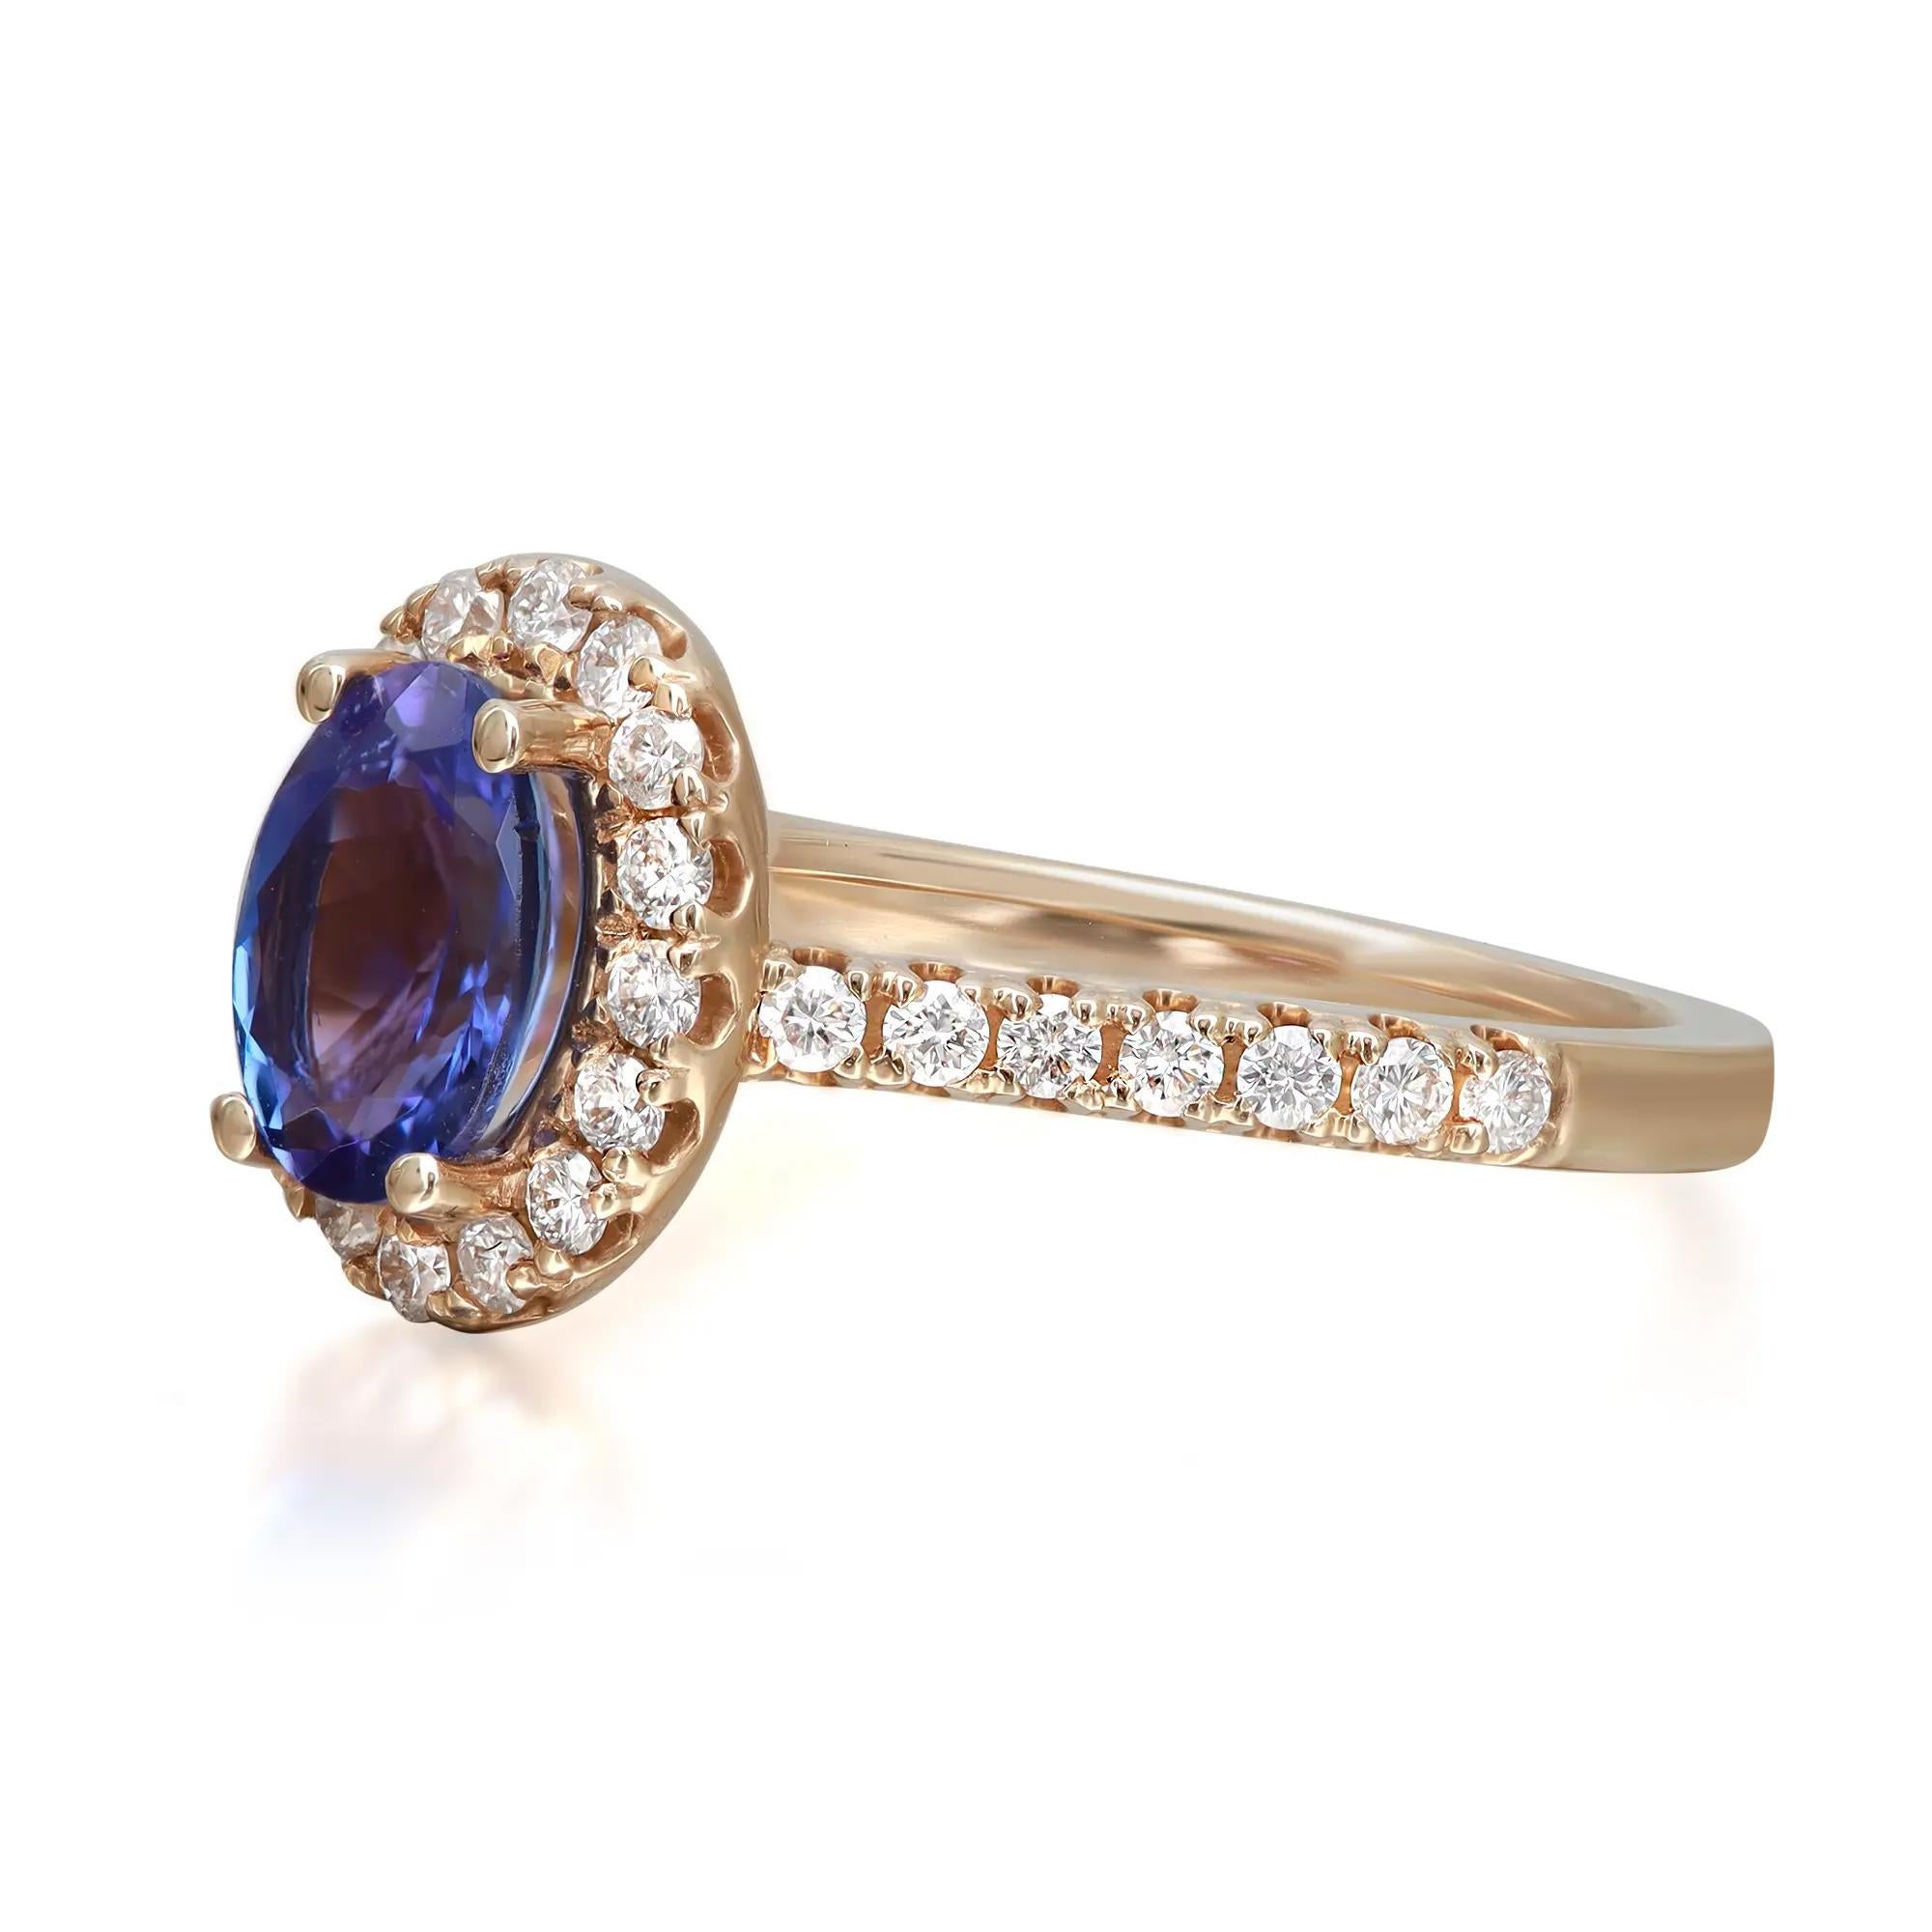 Oval Cut Tanzanite and Diamond Cocktail Ring 14K Yellow Gold Size 6.5 In New Condition For Sale In New York, NY